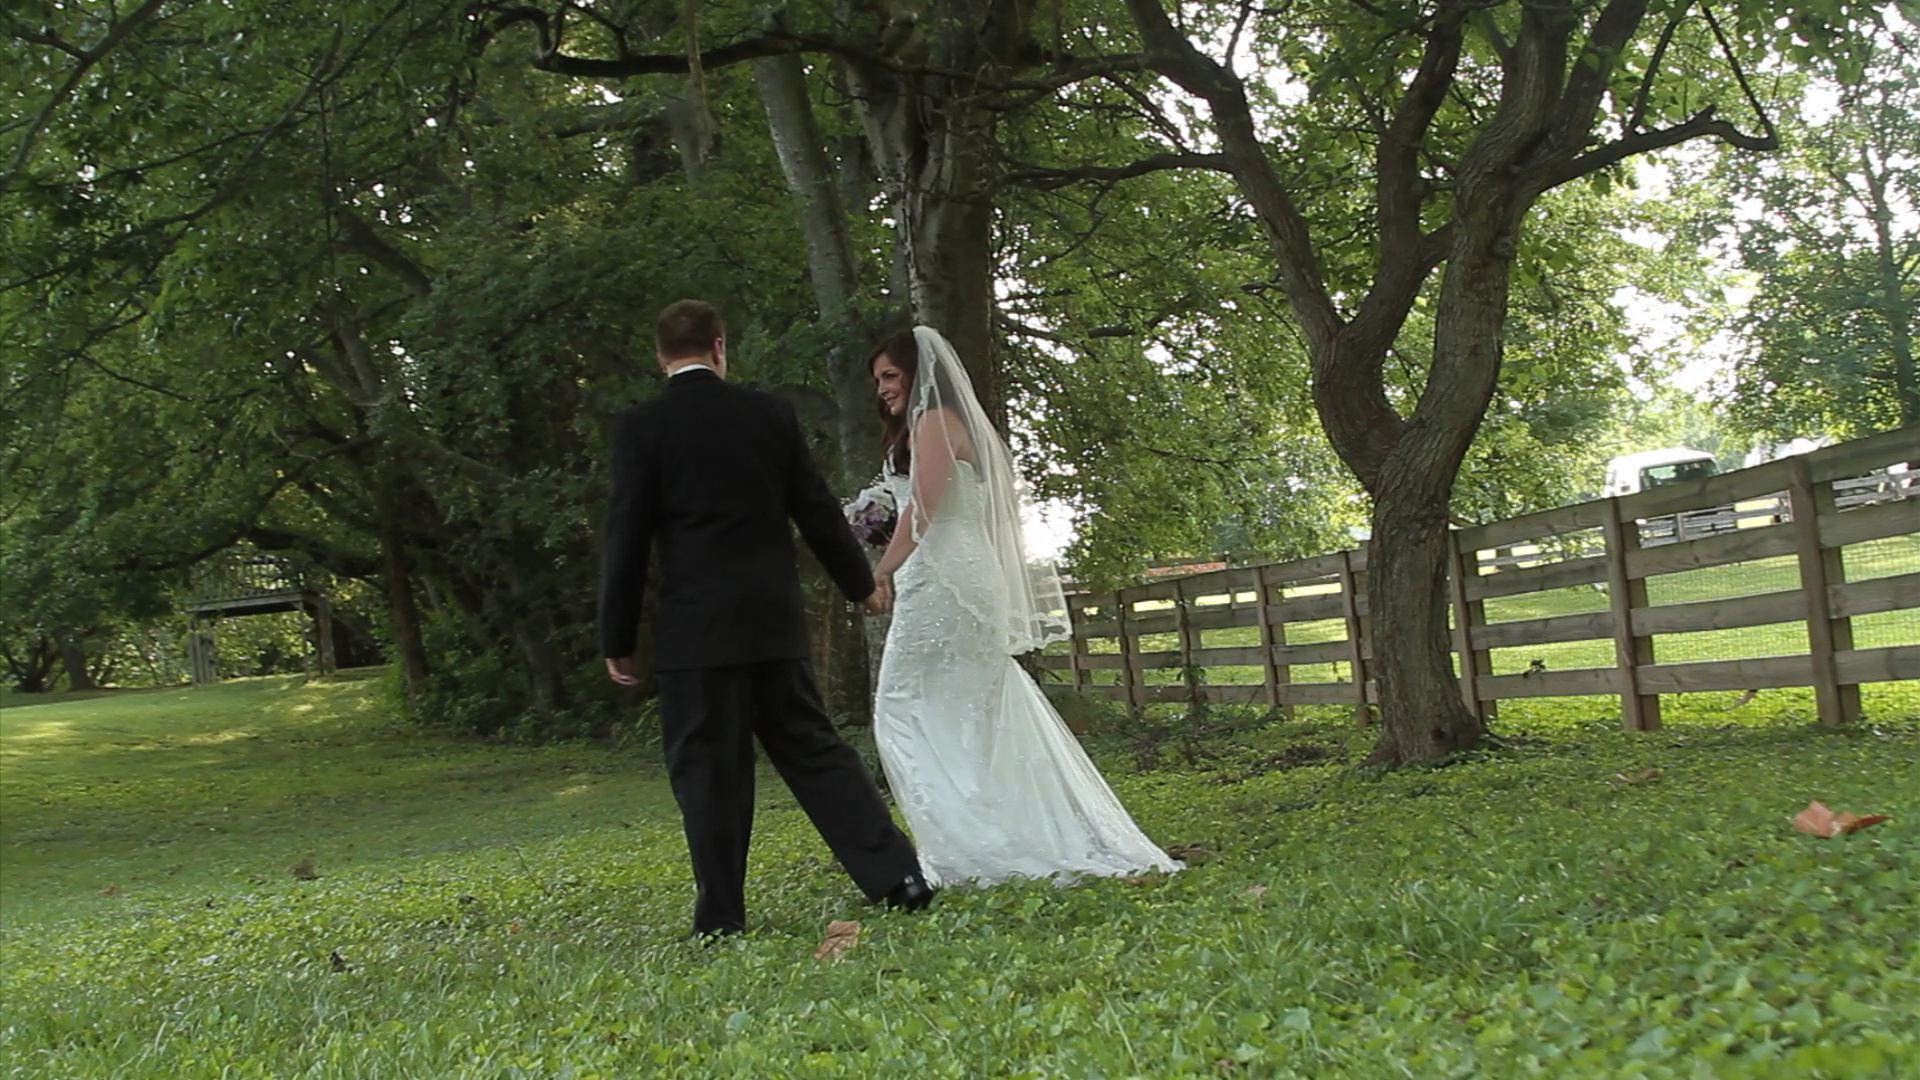 Maria and Chase's wedding reception video in Nashville, TN